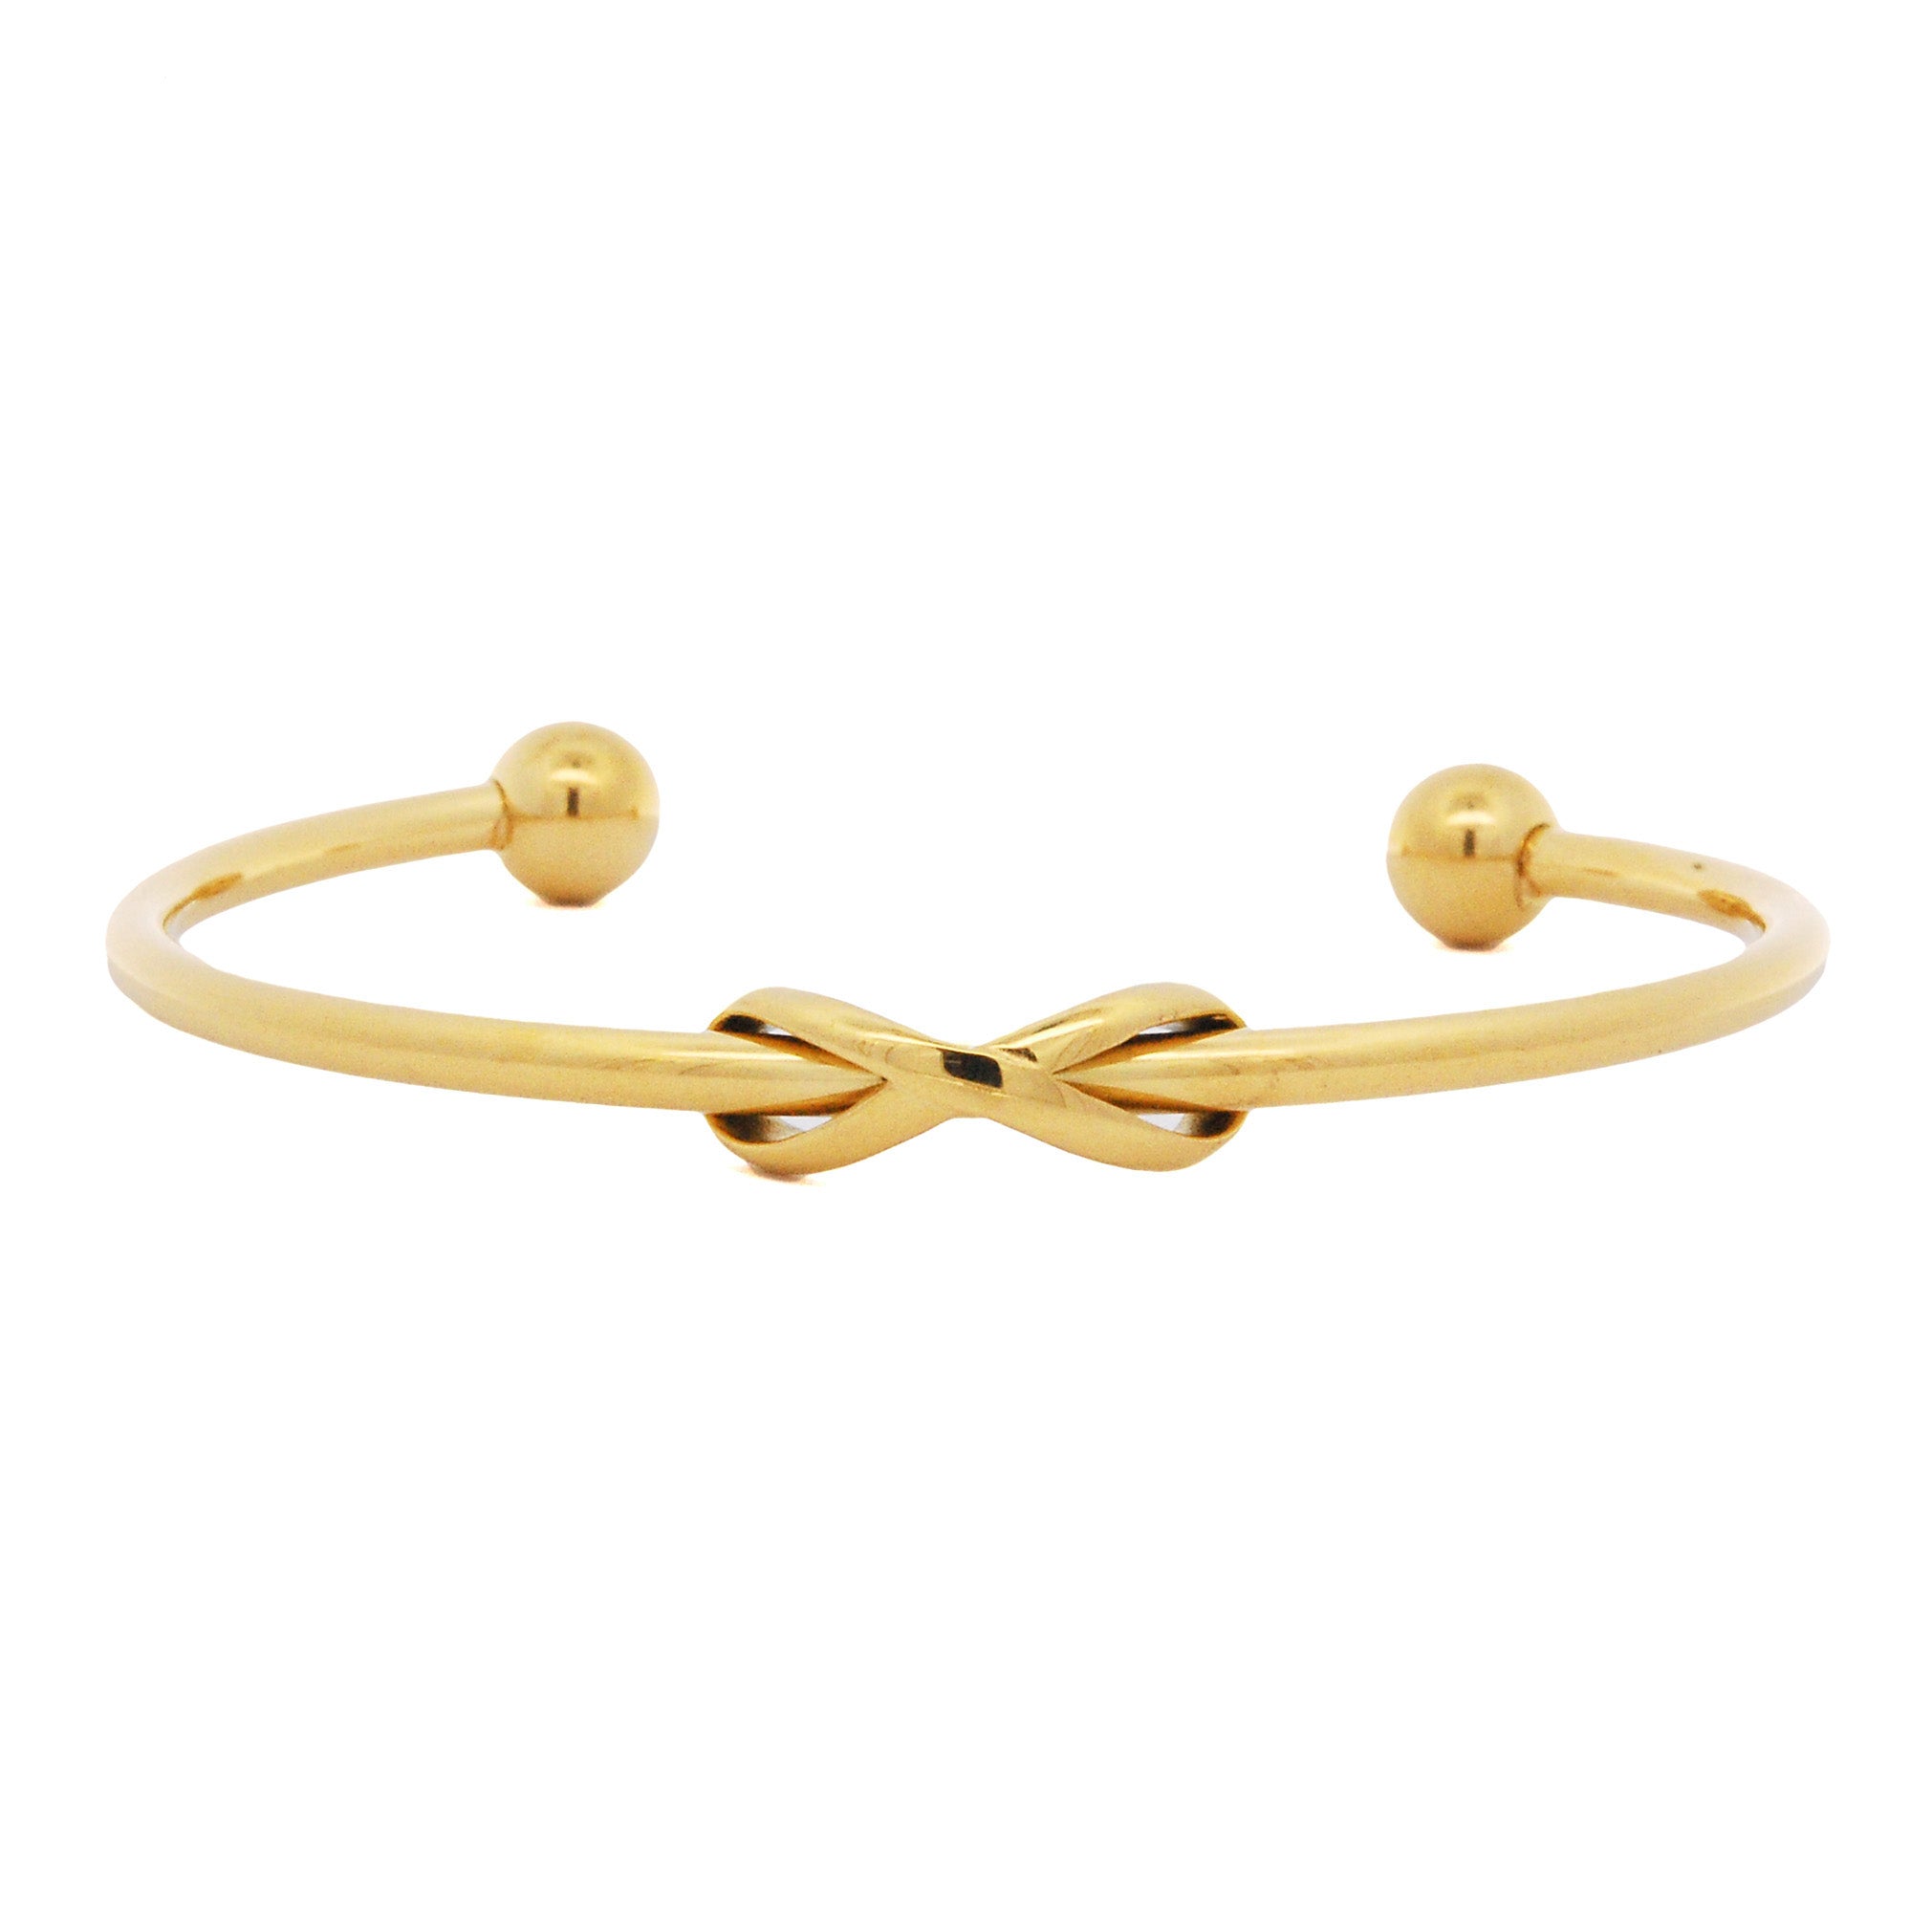 ESBG 7627: Hard Gold-Plated Infinity Bangle w/ Ball Ends